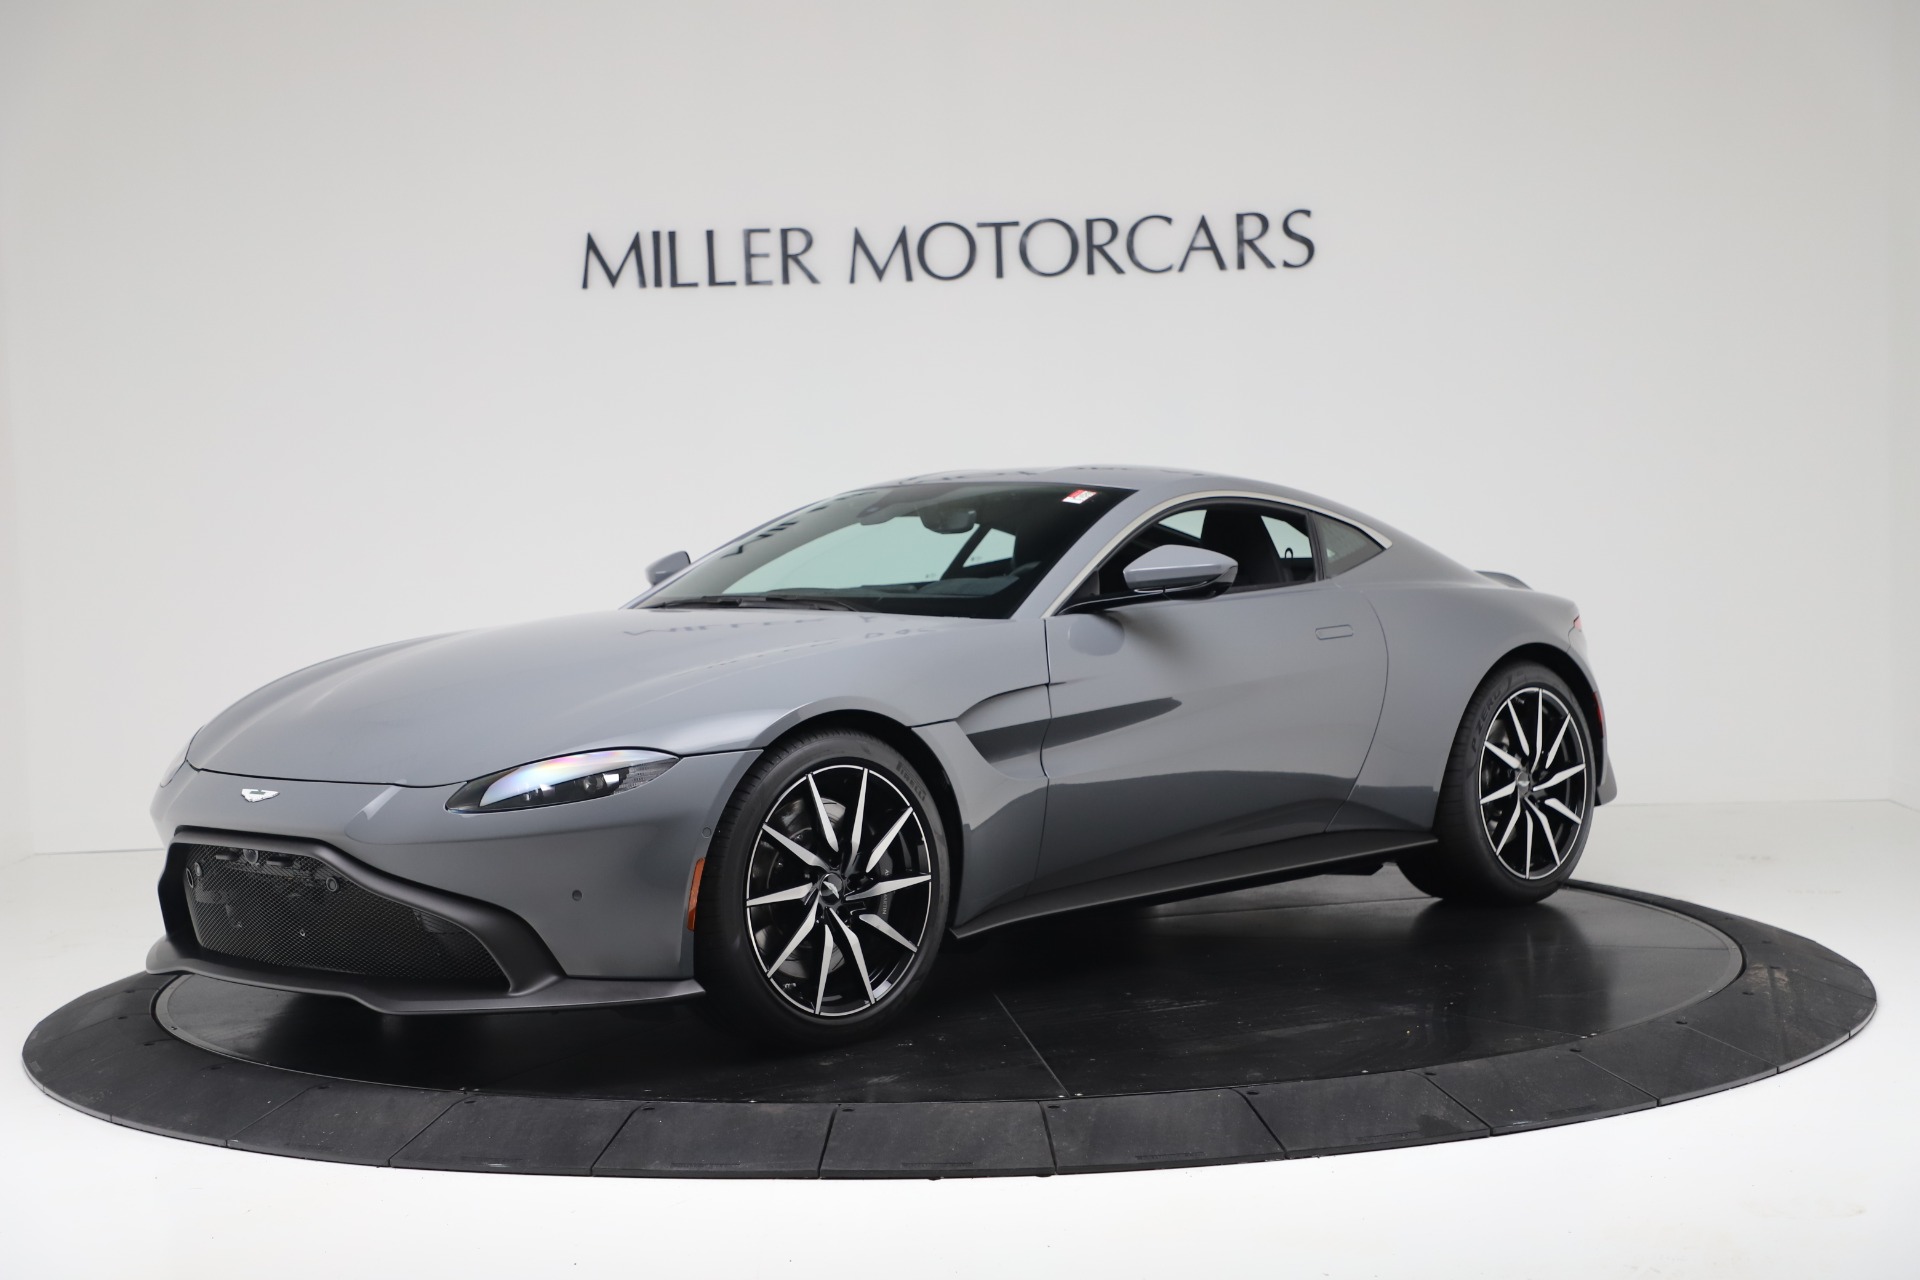 New 2020 Aston Martin Vantage Coupe For Sale Miller